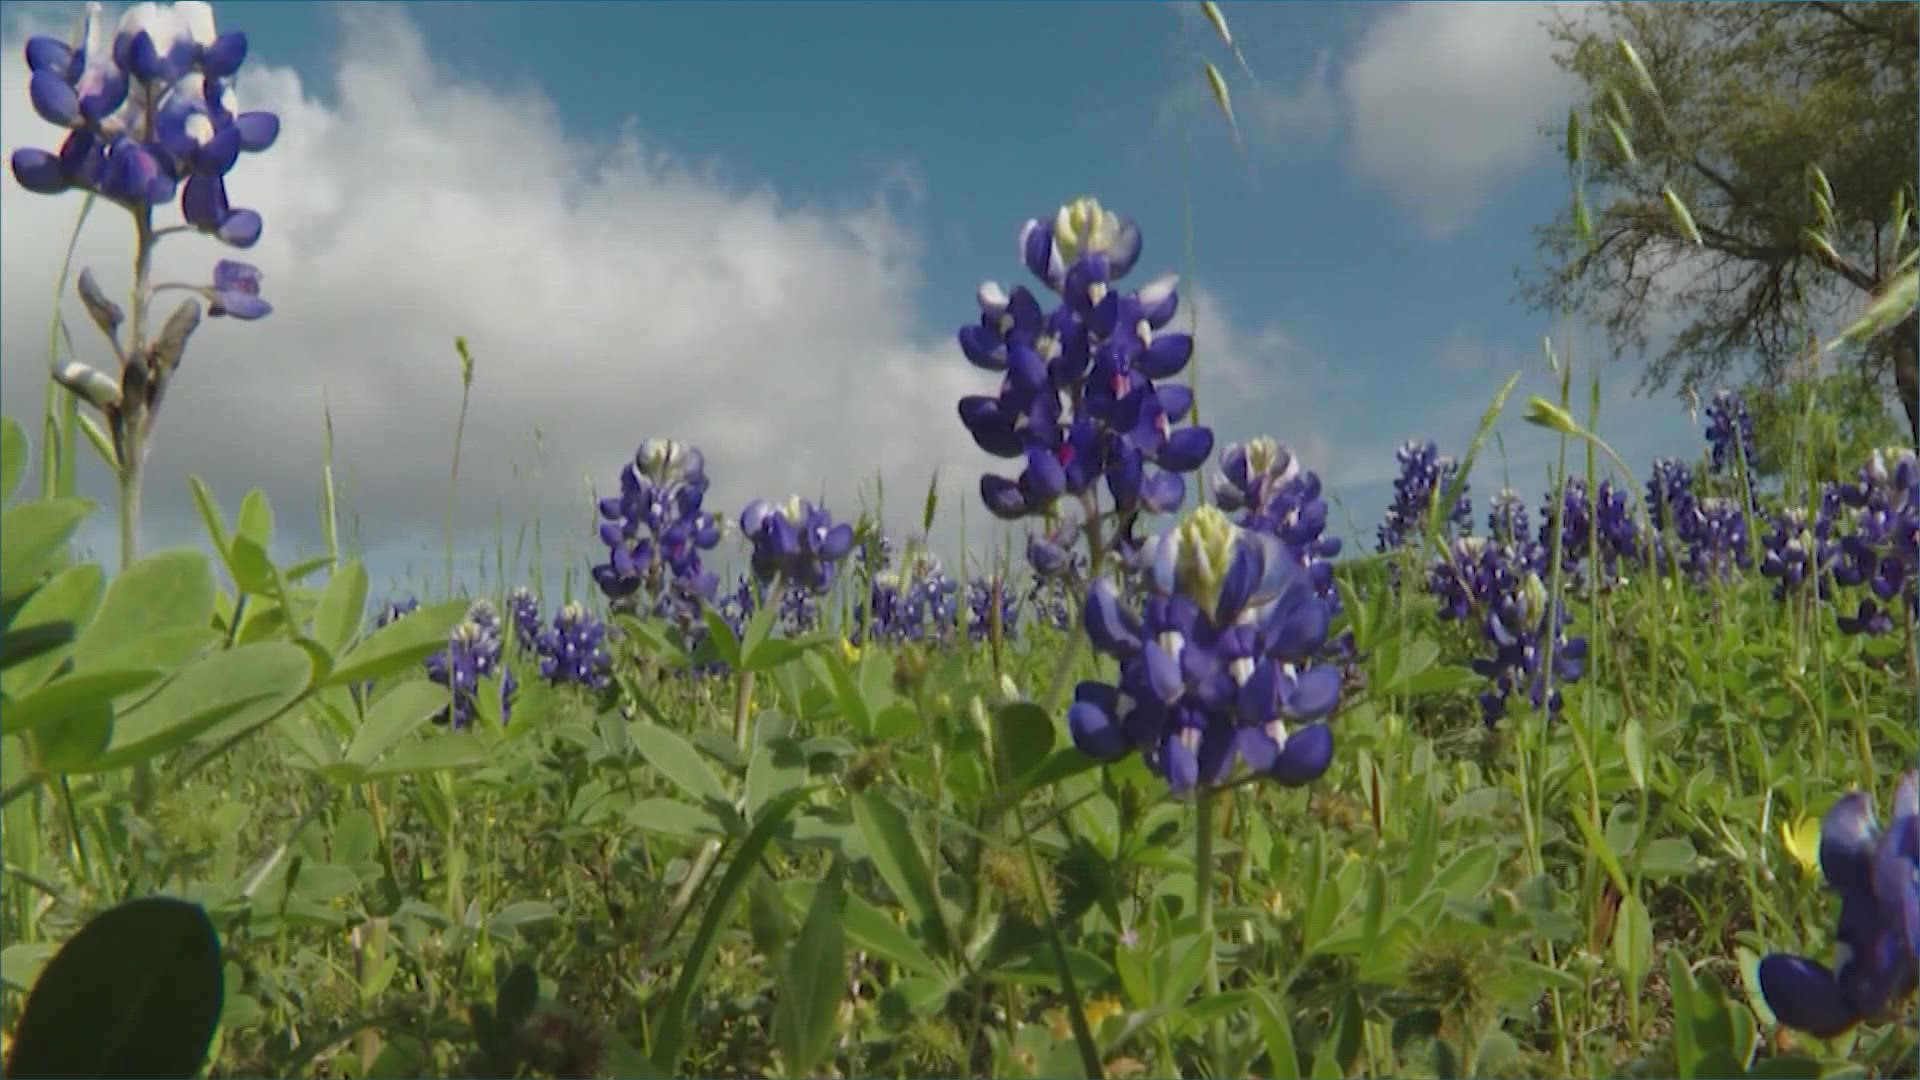 Posing pets and kids amidst the bluebonnet blooms is a Texas tradition as old as the hills. We've put together a guide to help you find the best wildflower patches.